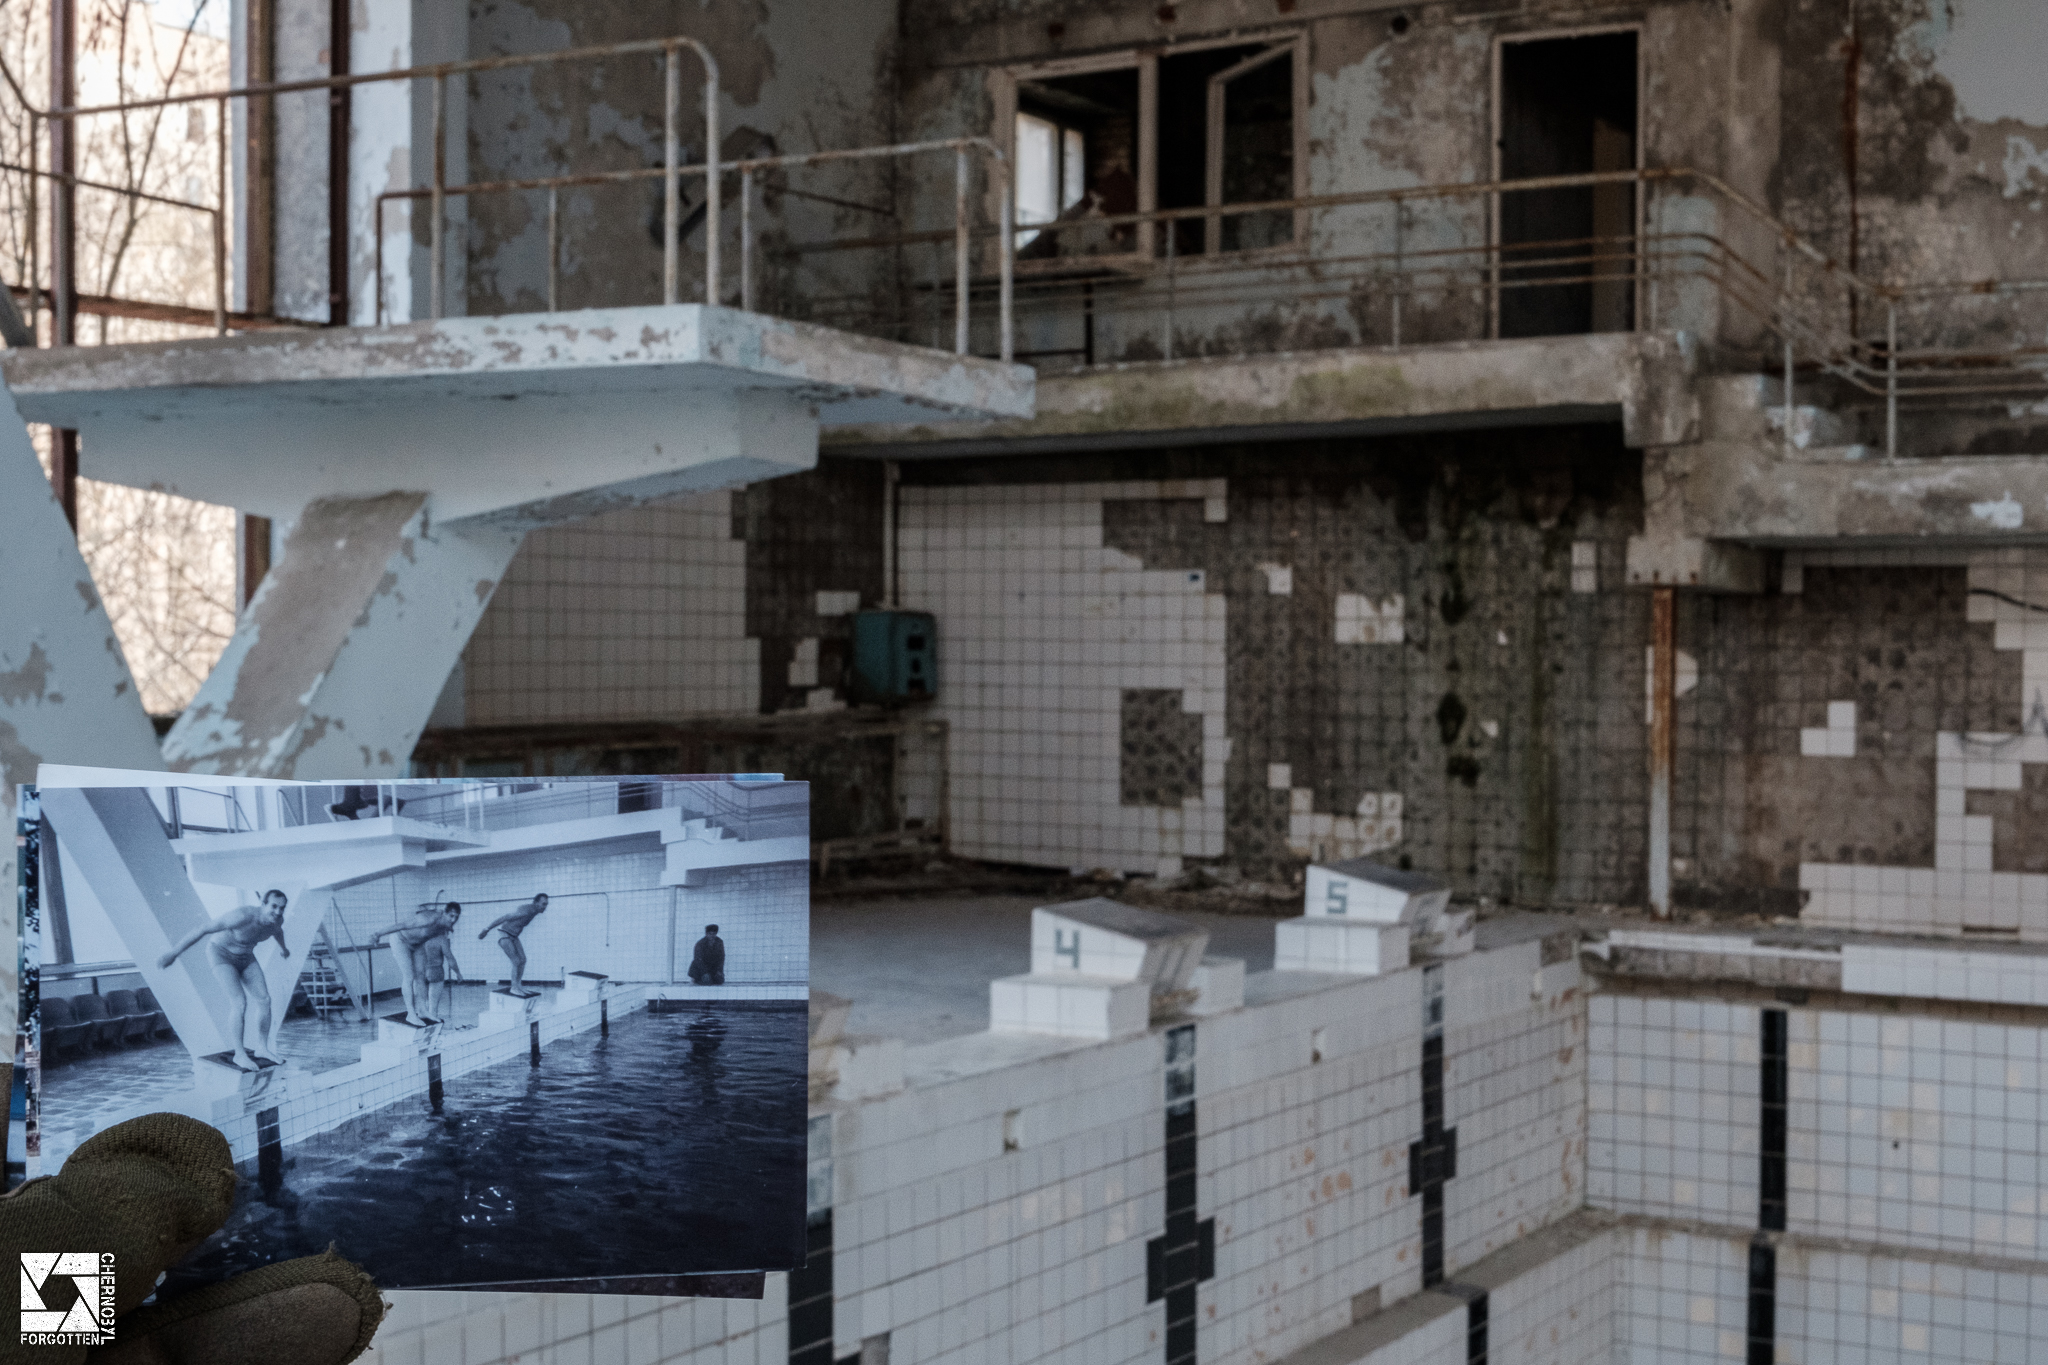 Pripyat Swimming Pool Before and After the Chernobyl Accident